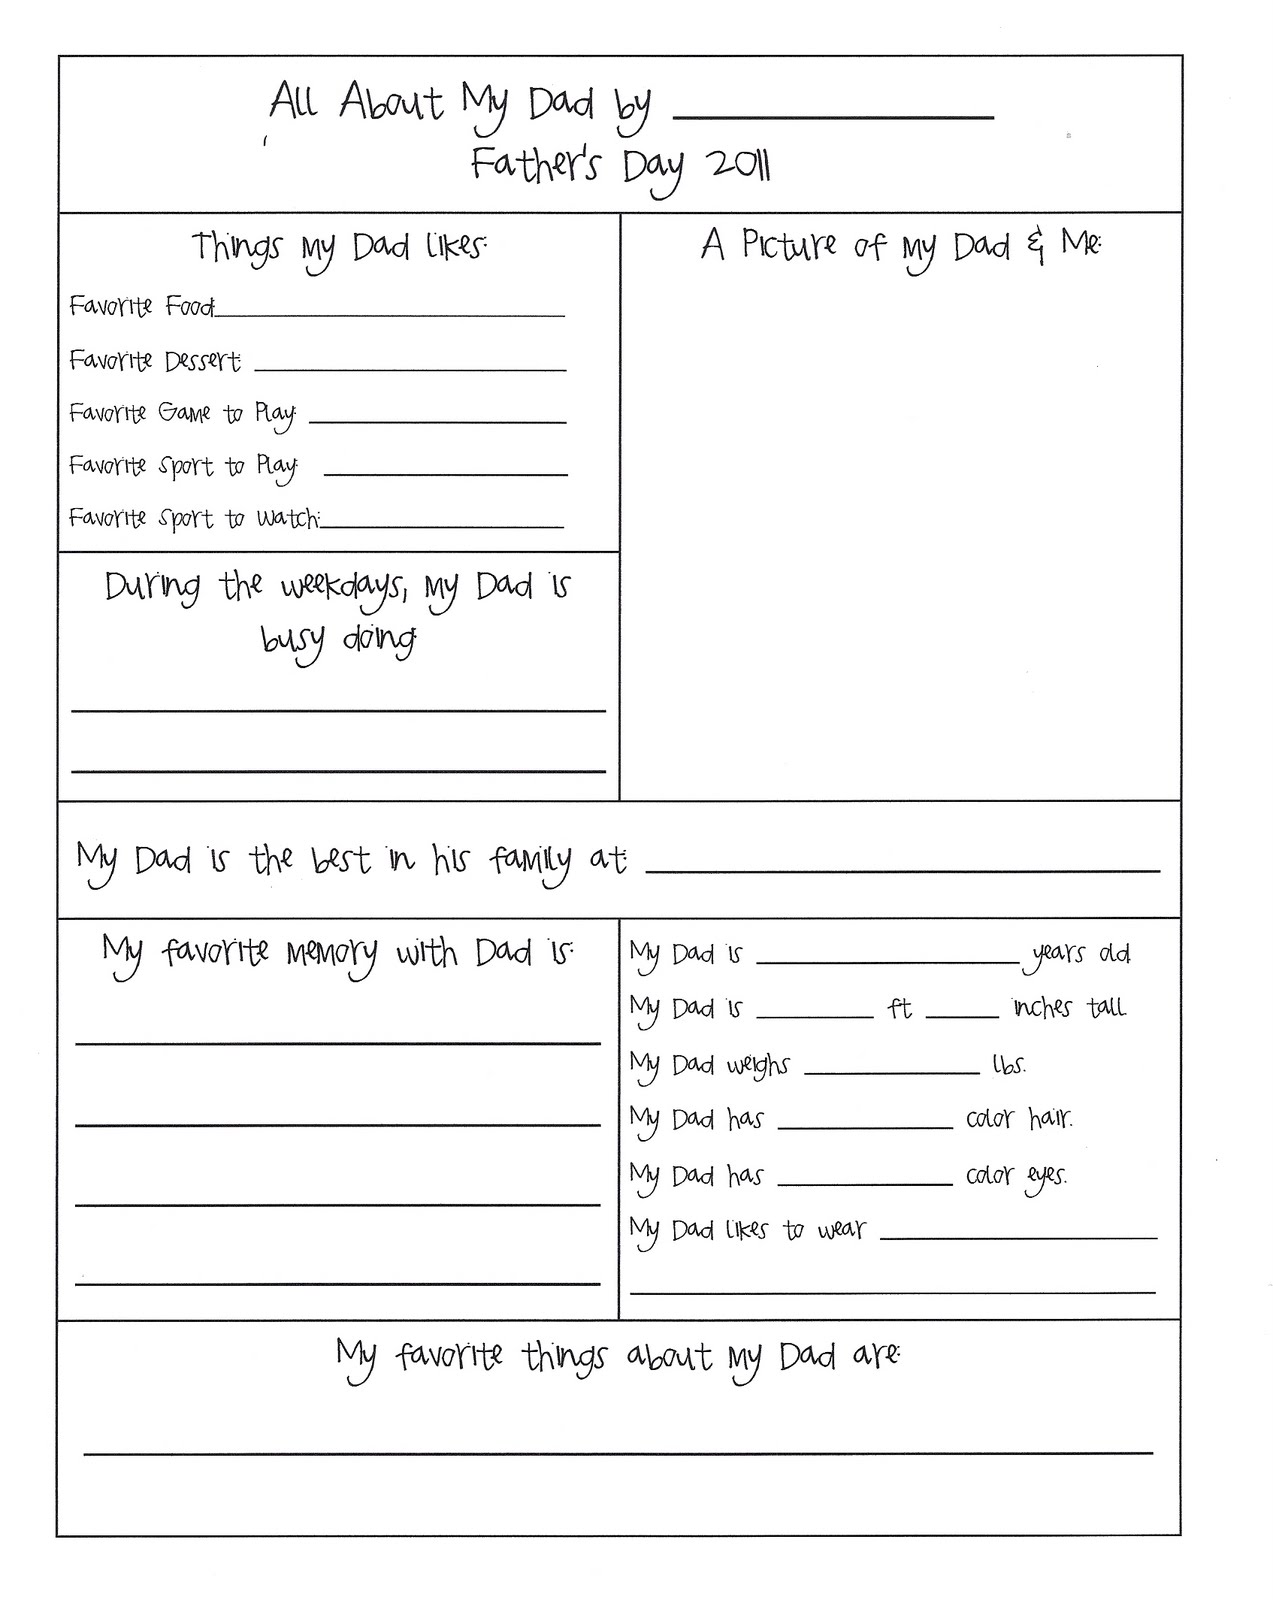 father-s-day-questionnaire-pdf-fathers-day-questionnaire-father-s-day-printable-fathers-day